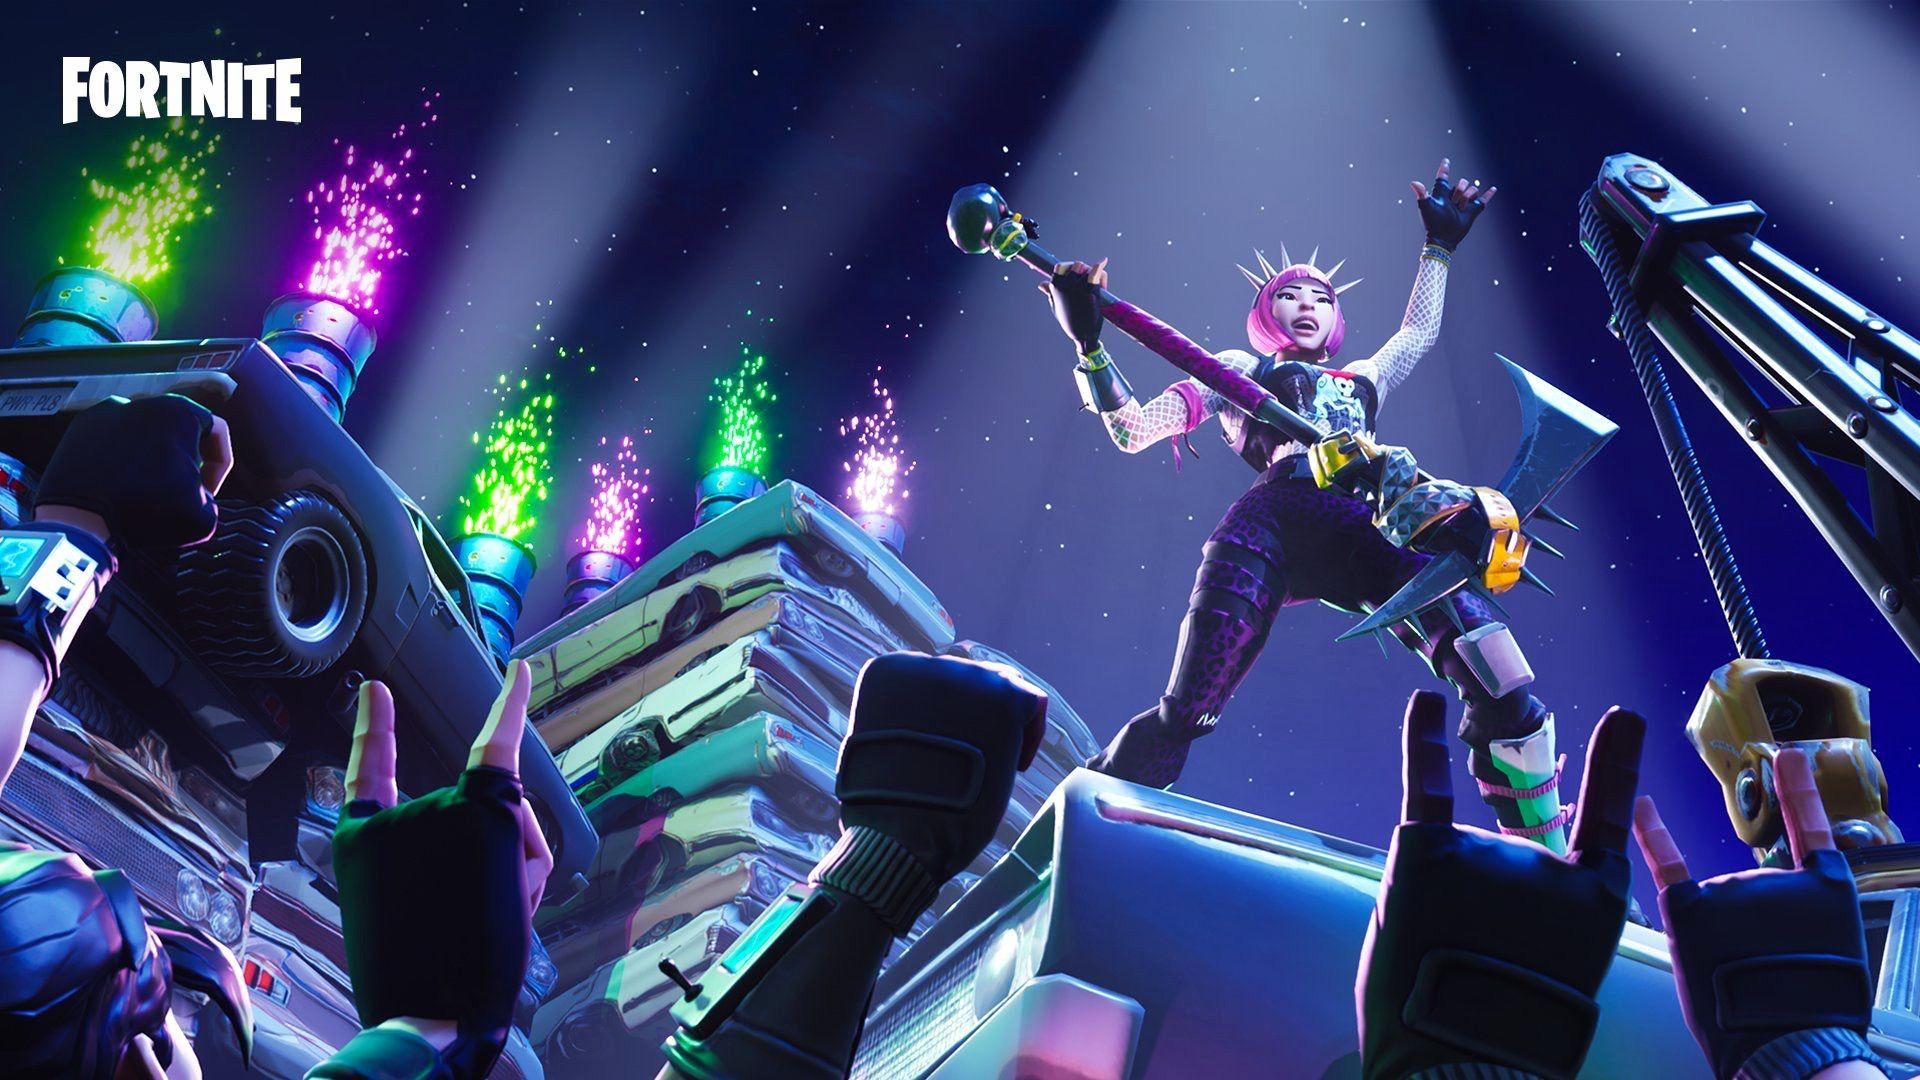 Fortnite Game Wallpaper Background HD 64421 1920x1080px